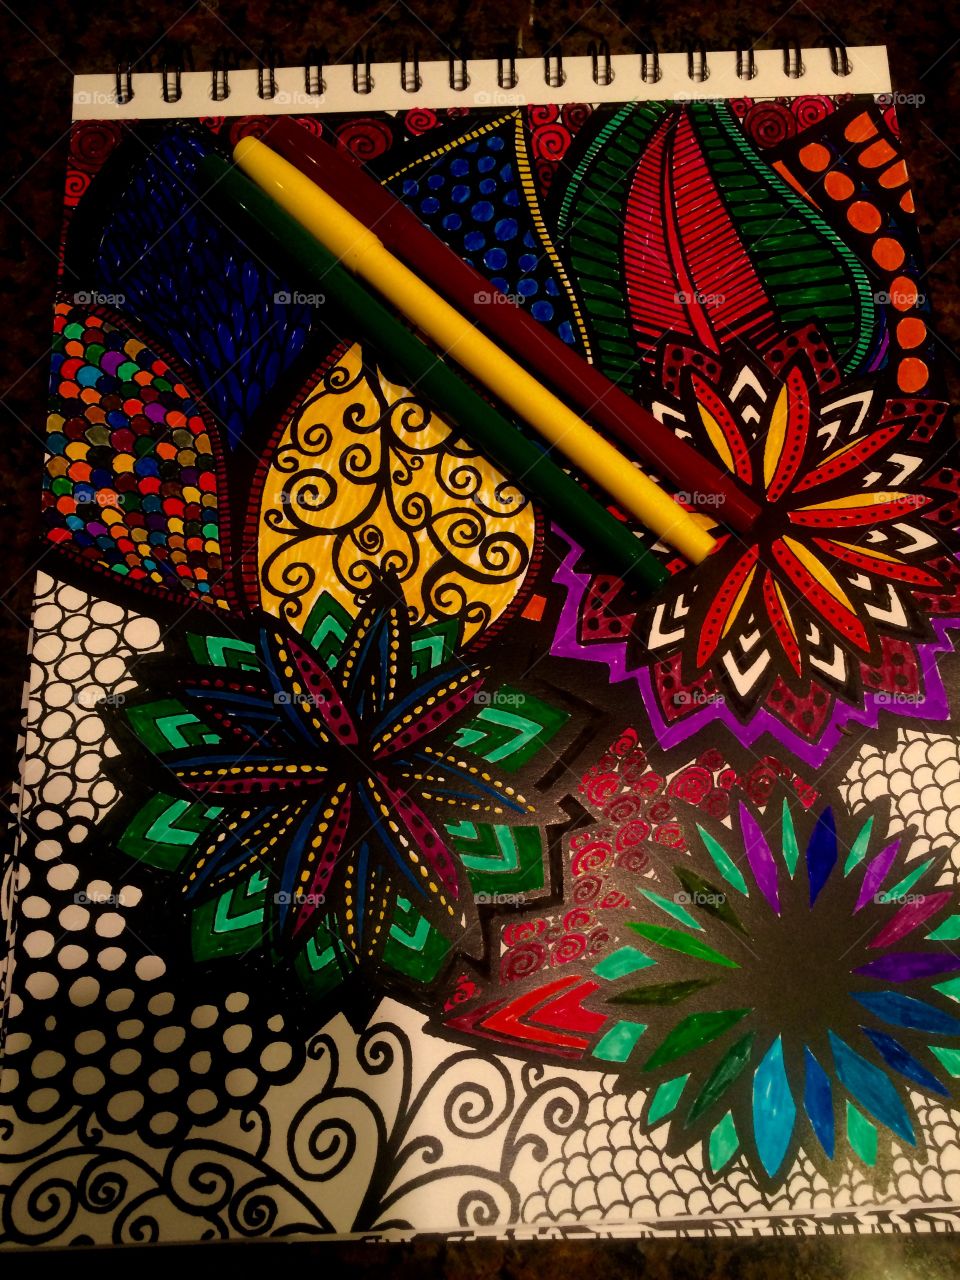 Coloring
